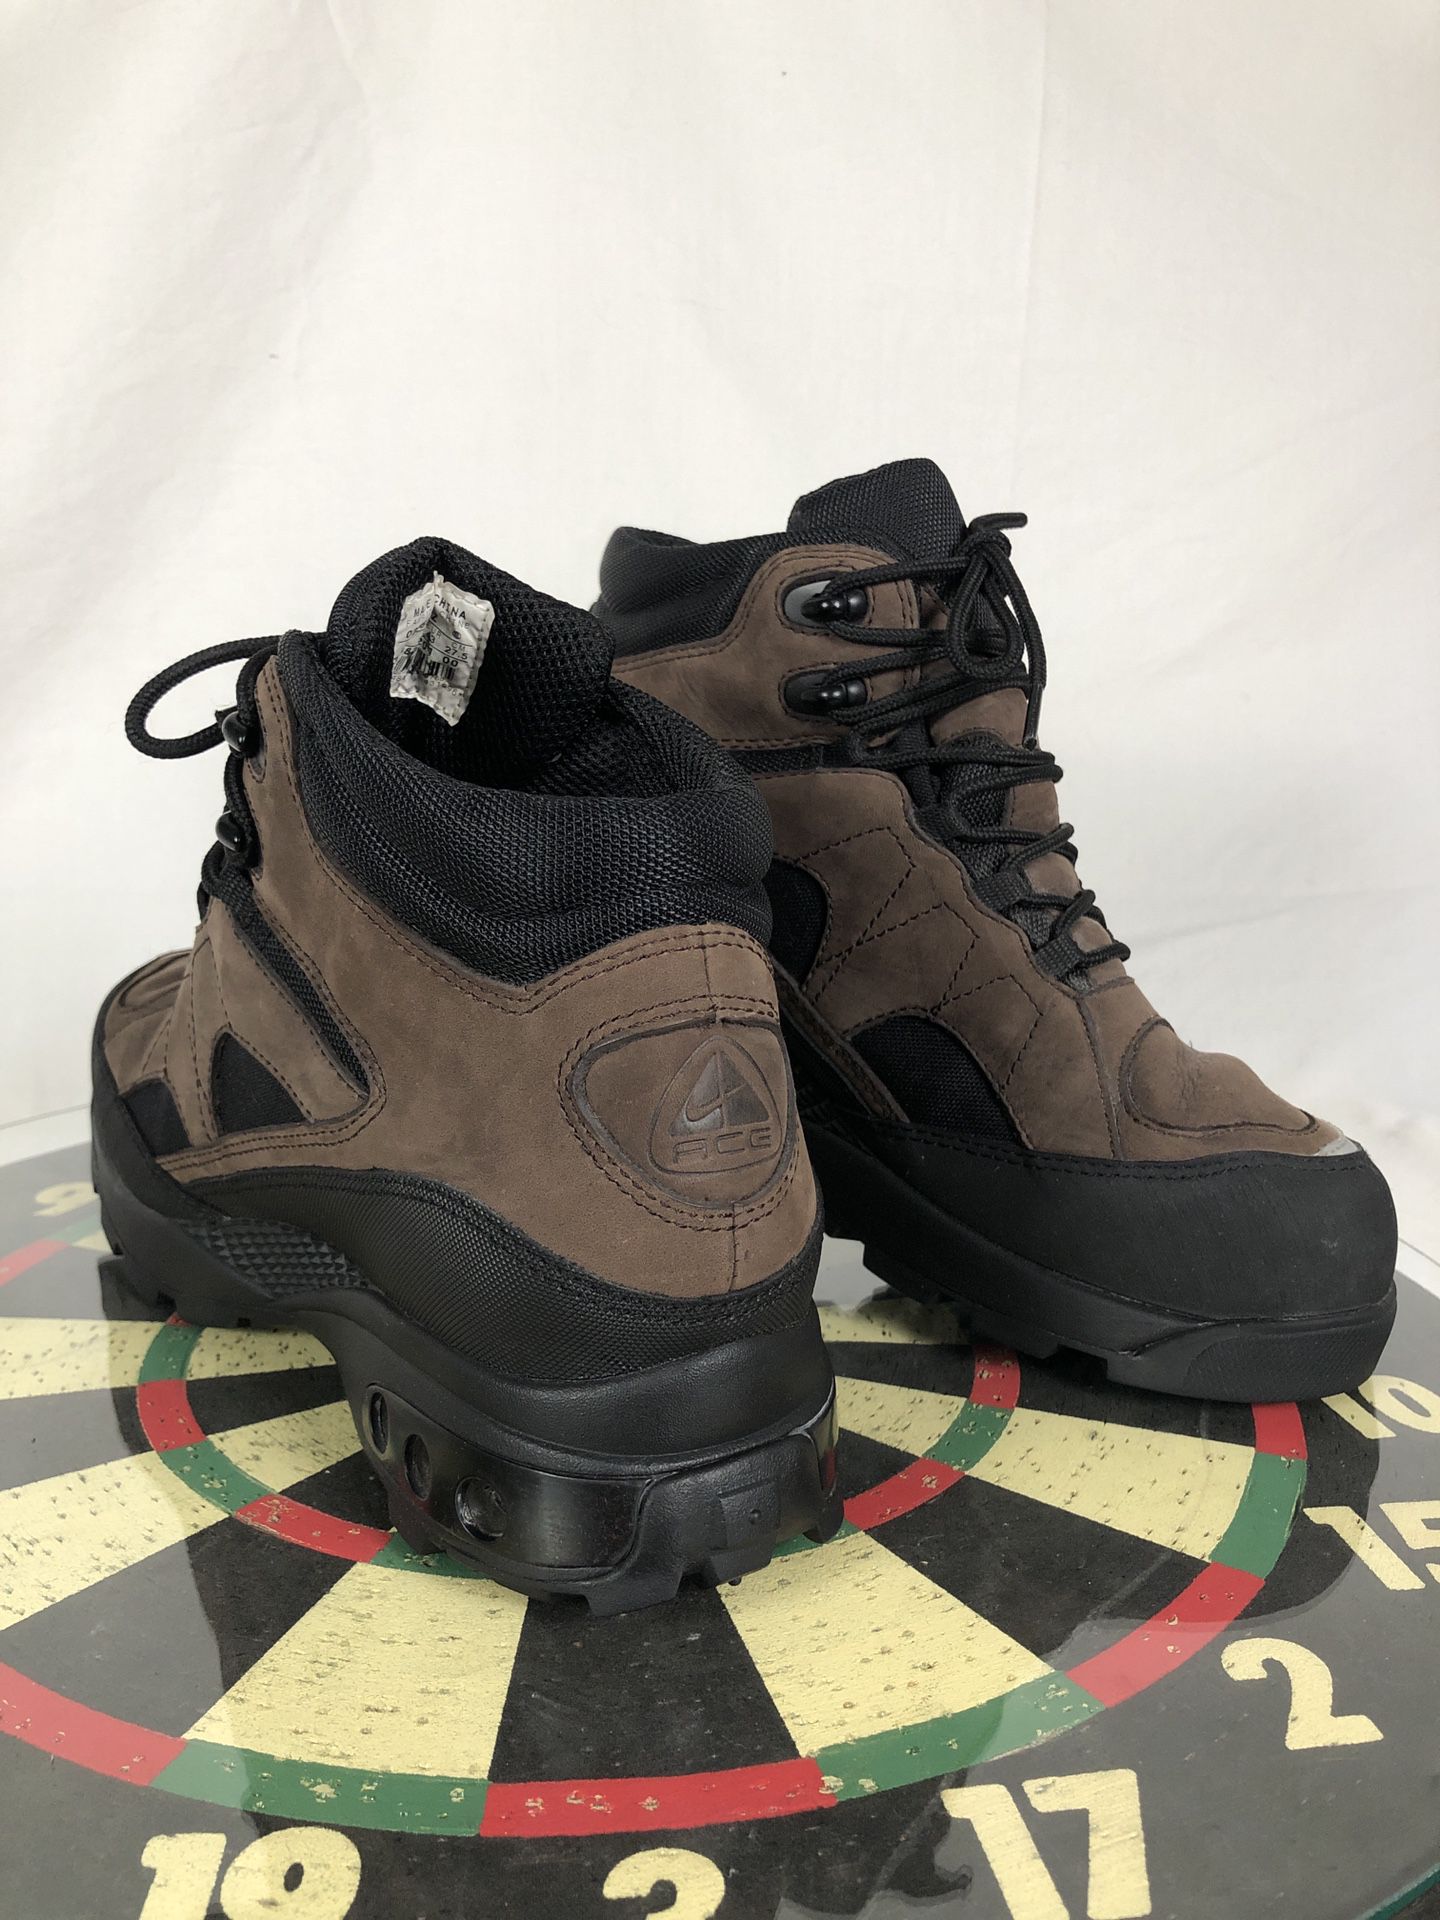 Nike ACG Air Hiking Brown Boots Men 9.5 US Leather Vintage 303830 Camping 2002